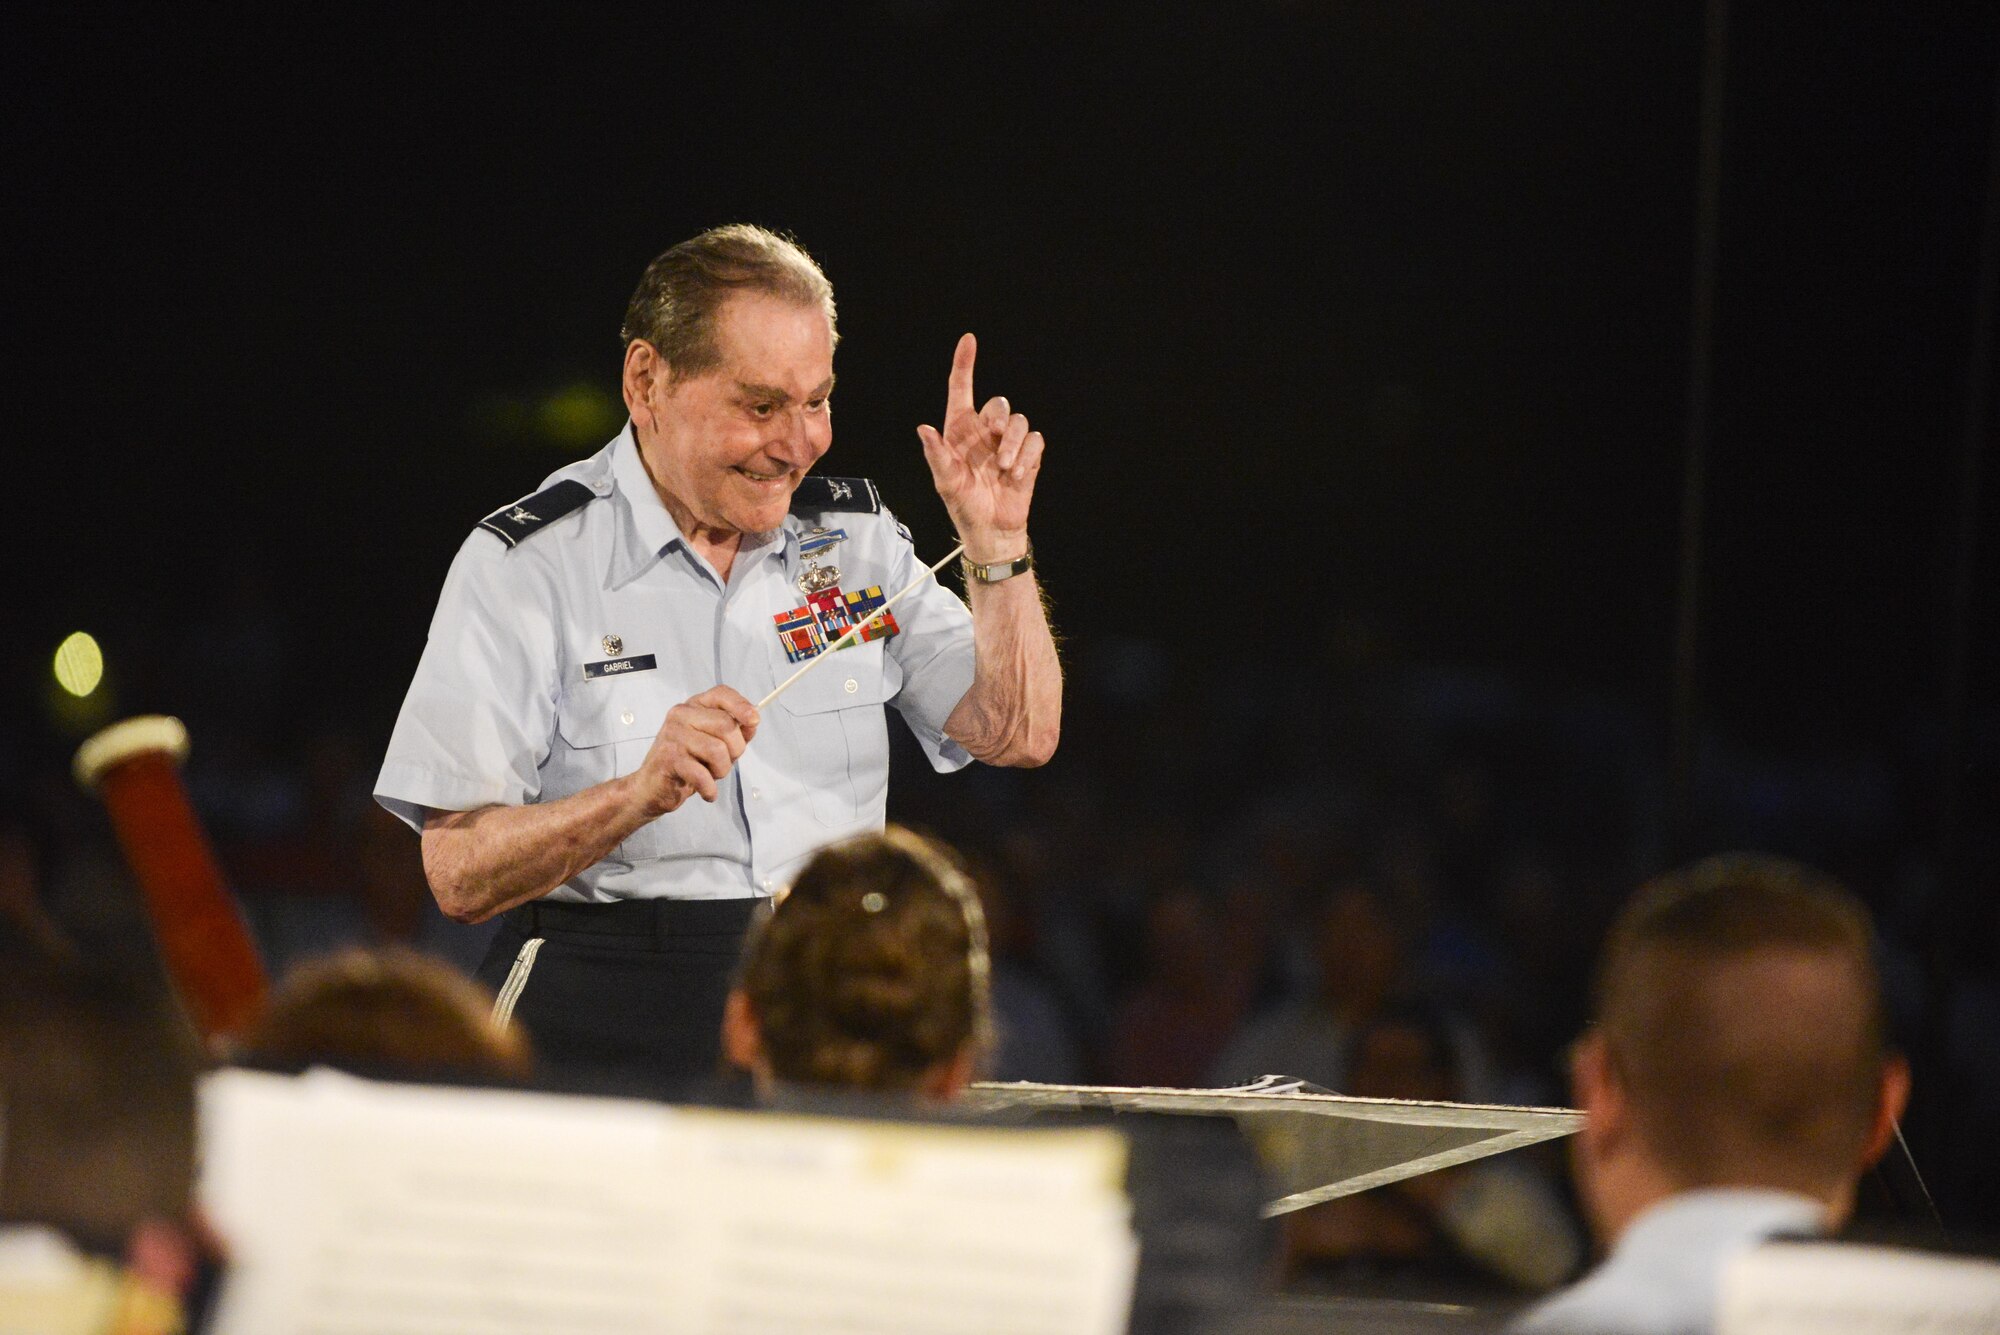 Honorary conductor retired Col. Arnald D. Gabriel leads an Air Force Band performance on a stage beneath the Air Force Memorial in Arlington, Va., Aug. 14, 2015. The band performed music from the World War II era after a wreath-laying ceremony and a flyover to commemorate the 70th anniversary of the end of World War II. (Air Force photo/Tech. Sgt. Joshua L. DeMotts)